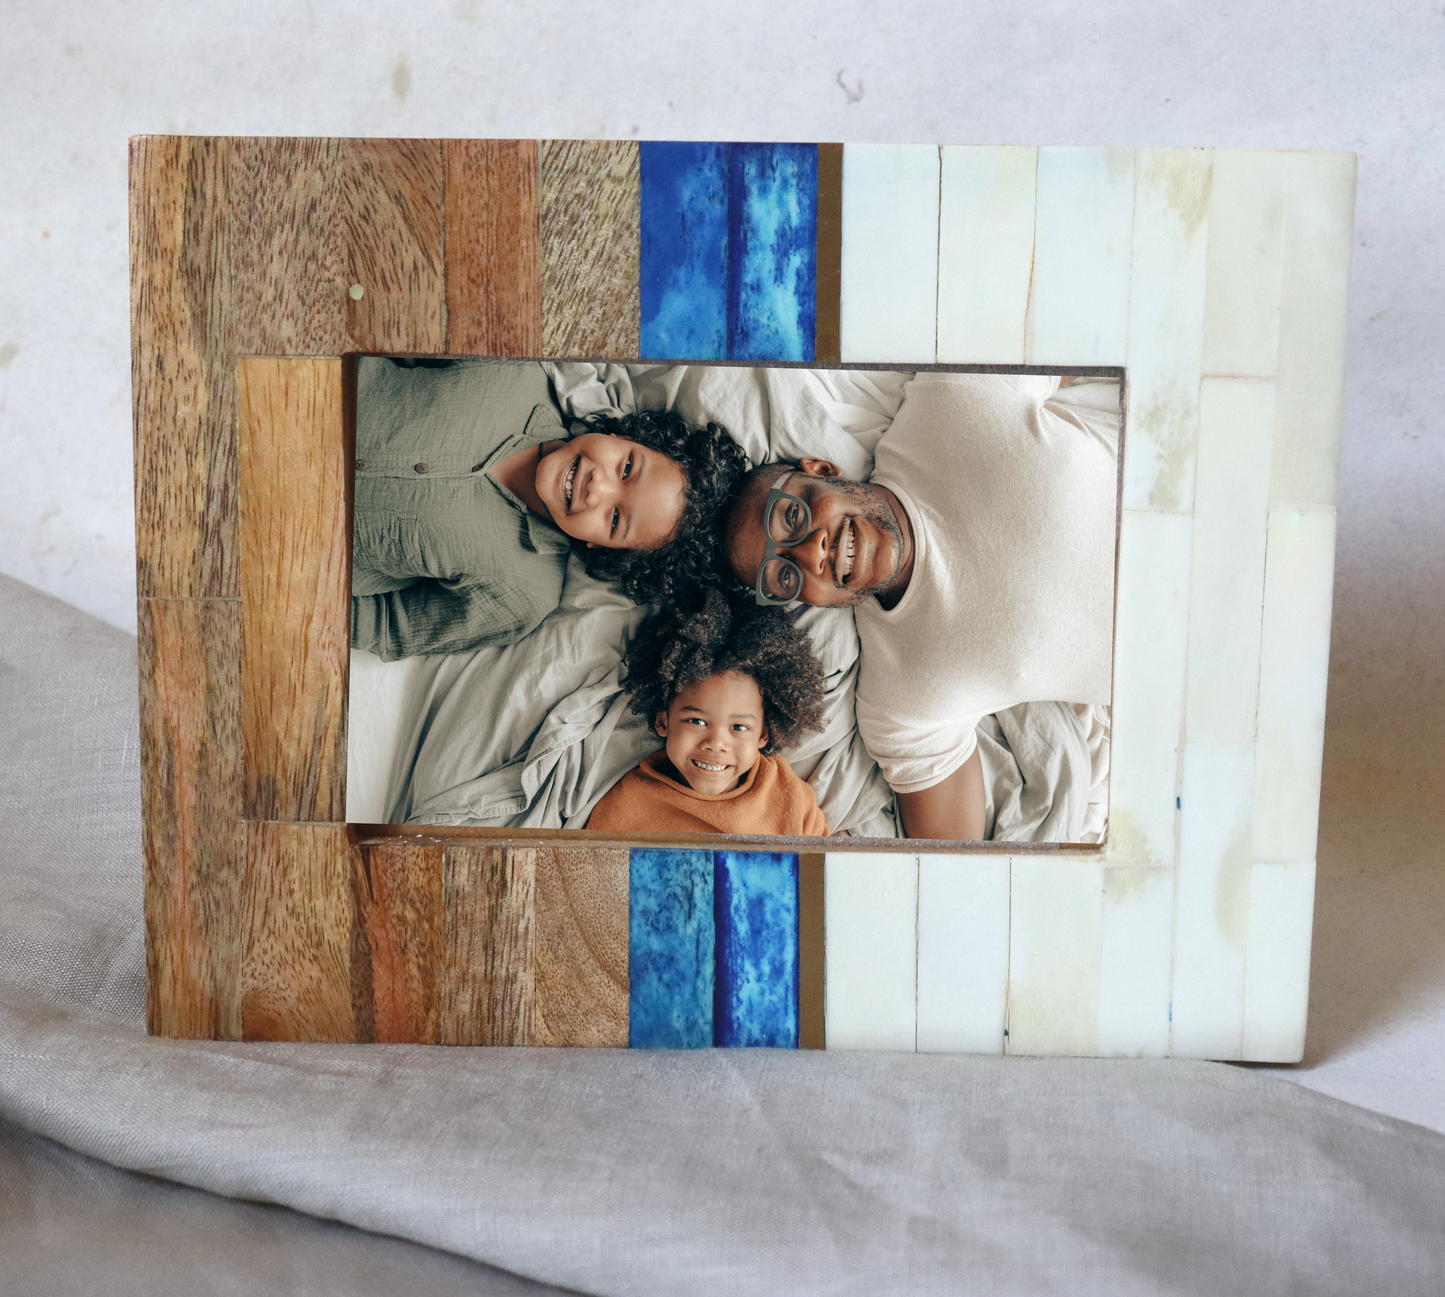 Blue-White-Brown Picture Frame|4x6 Photo|Portrait|Handmade|Sustainable - Aksa Home Decor 